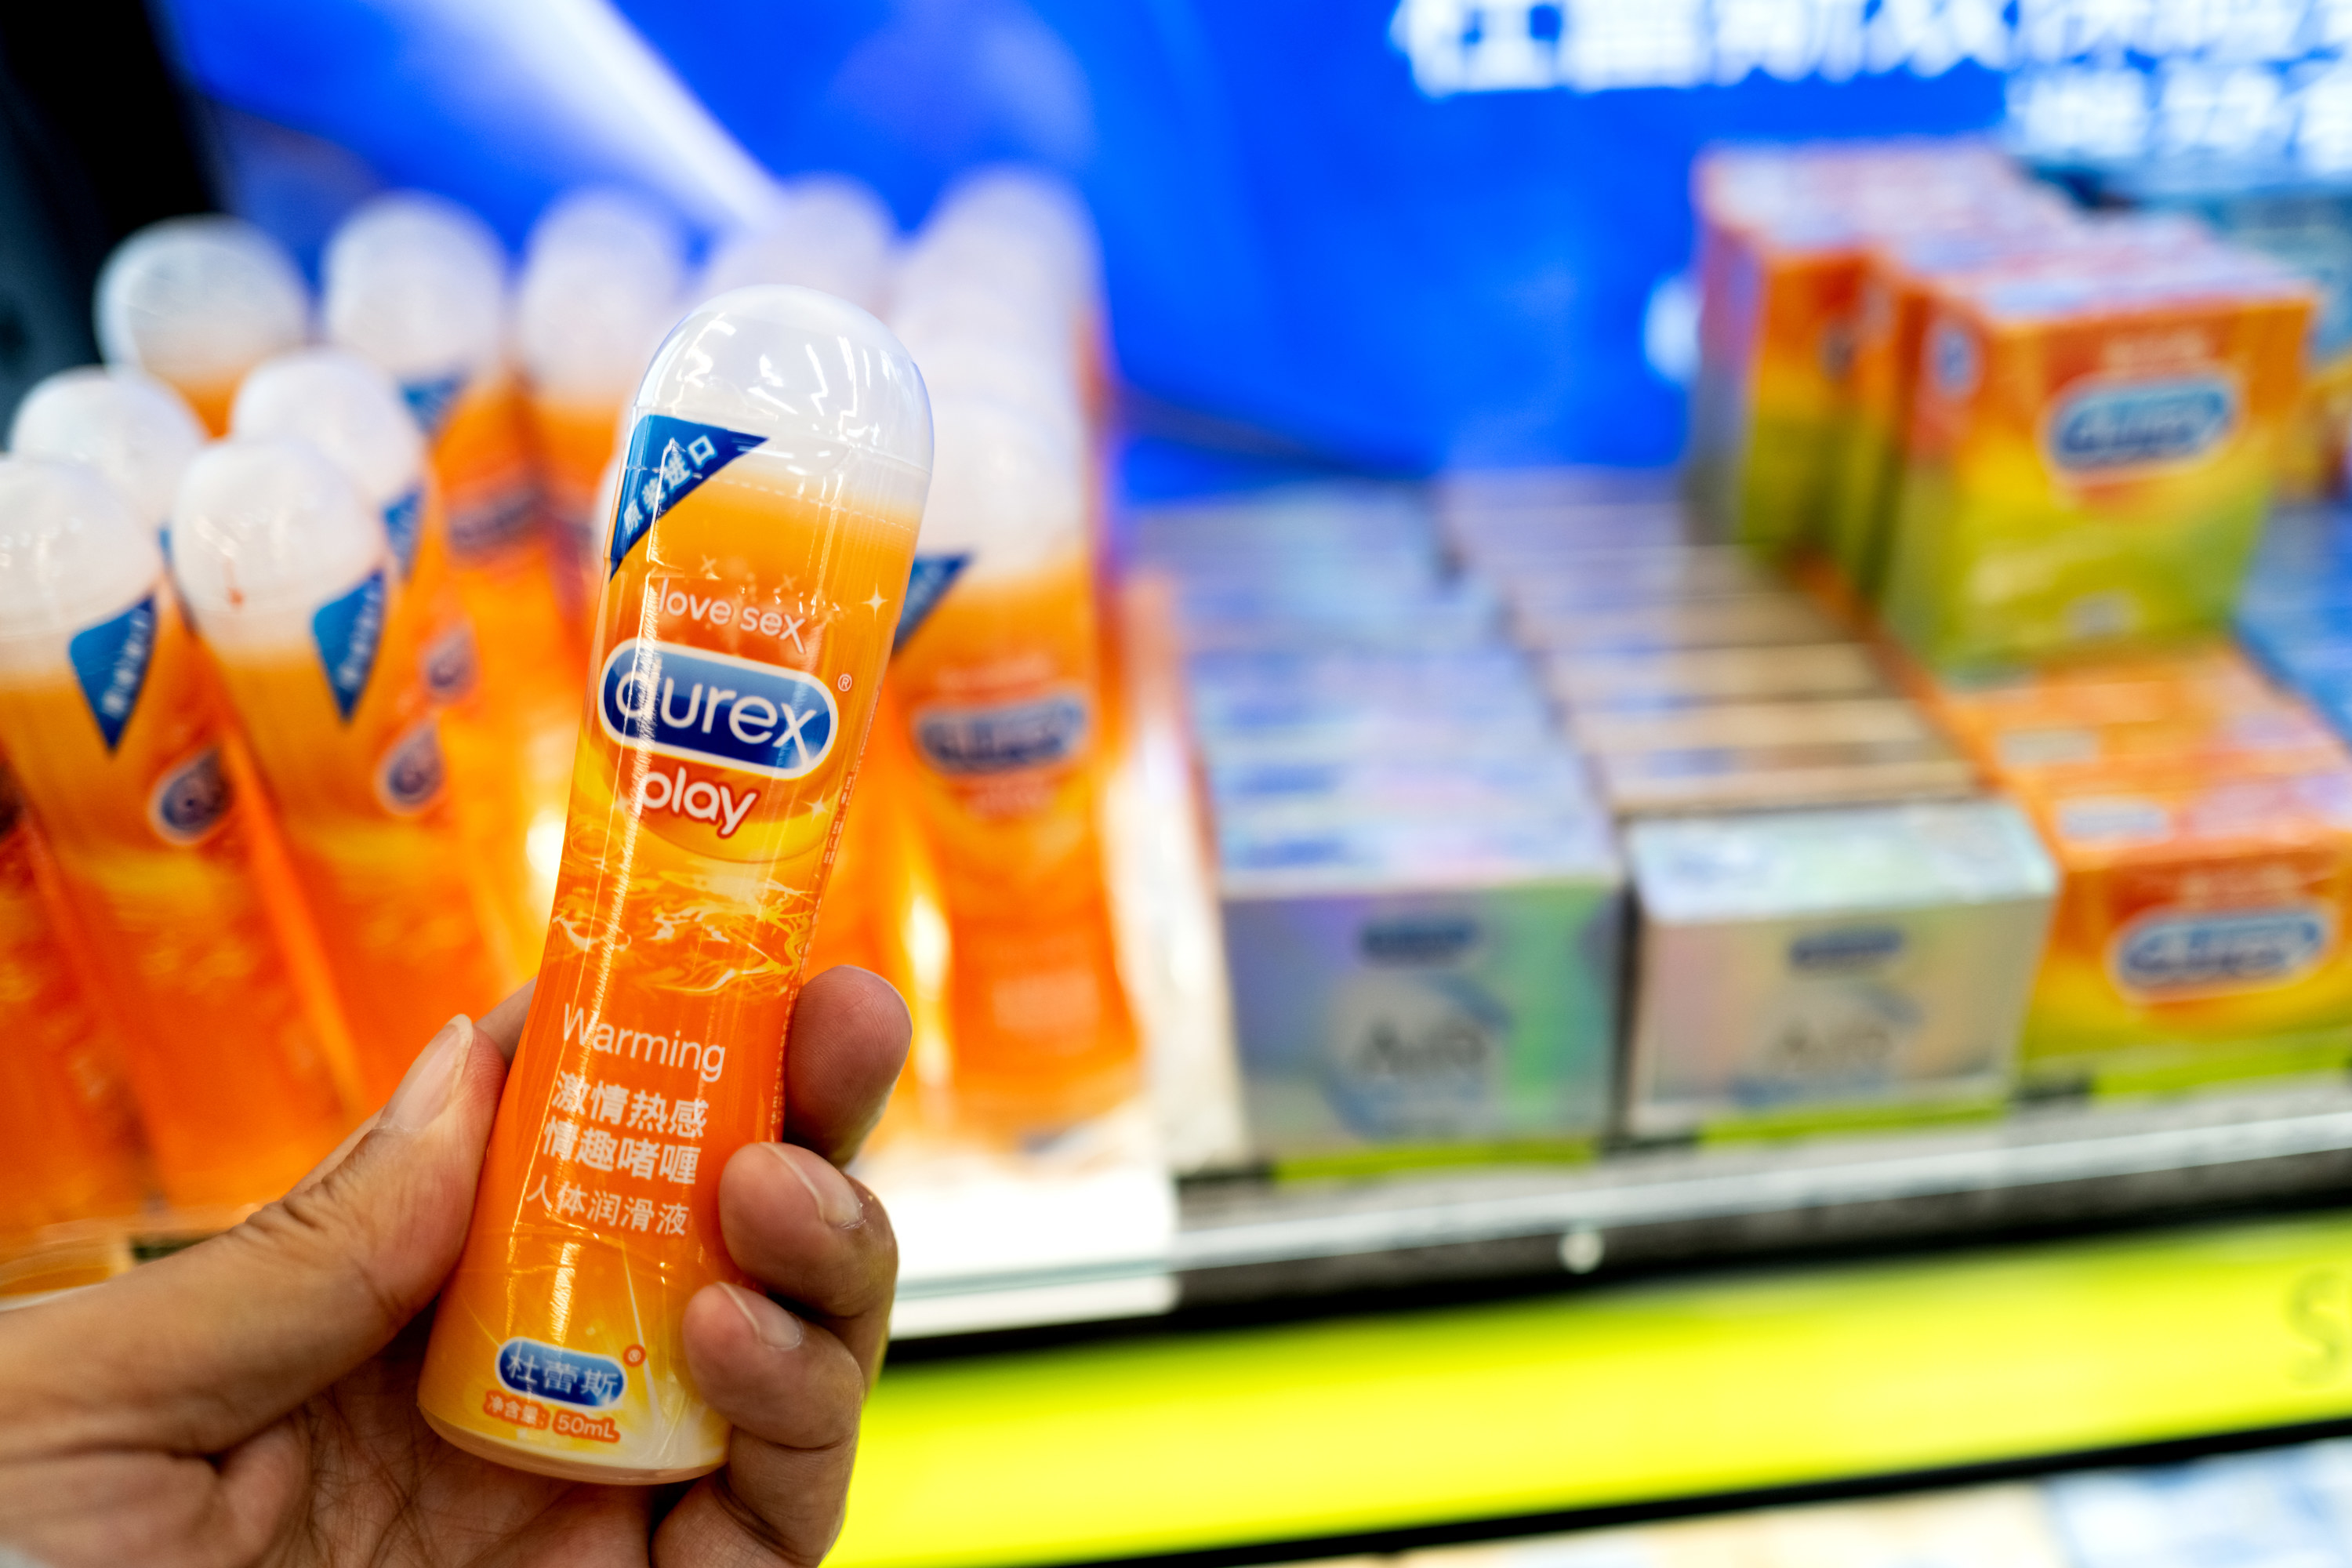 A person holding a tube of Durex brand lubricant in a store